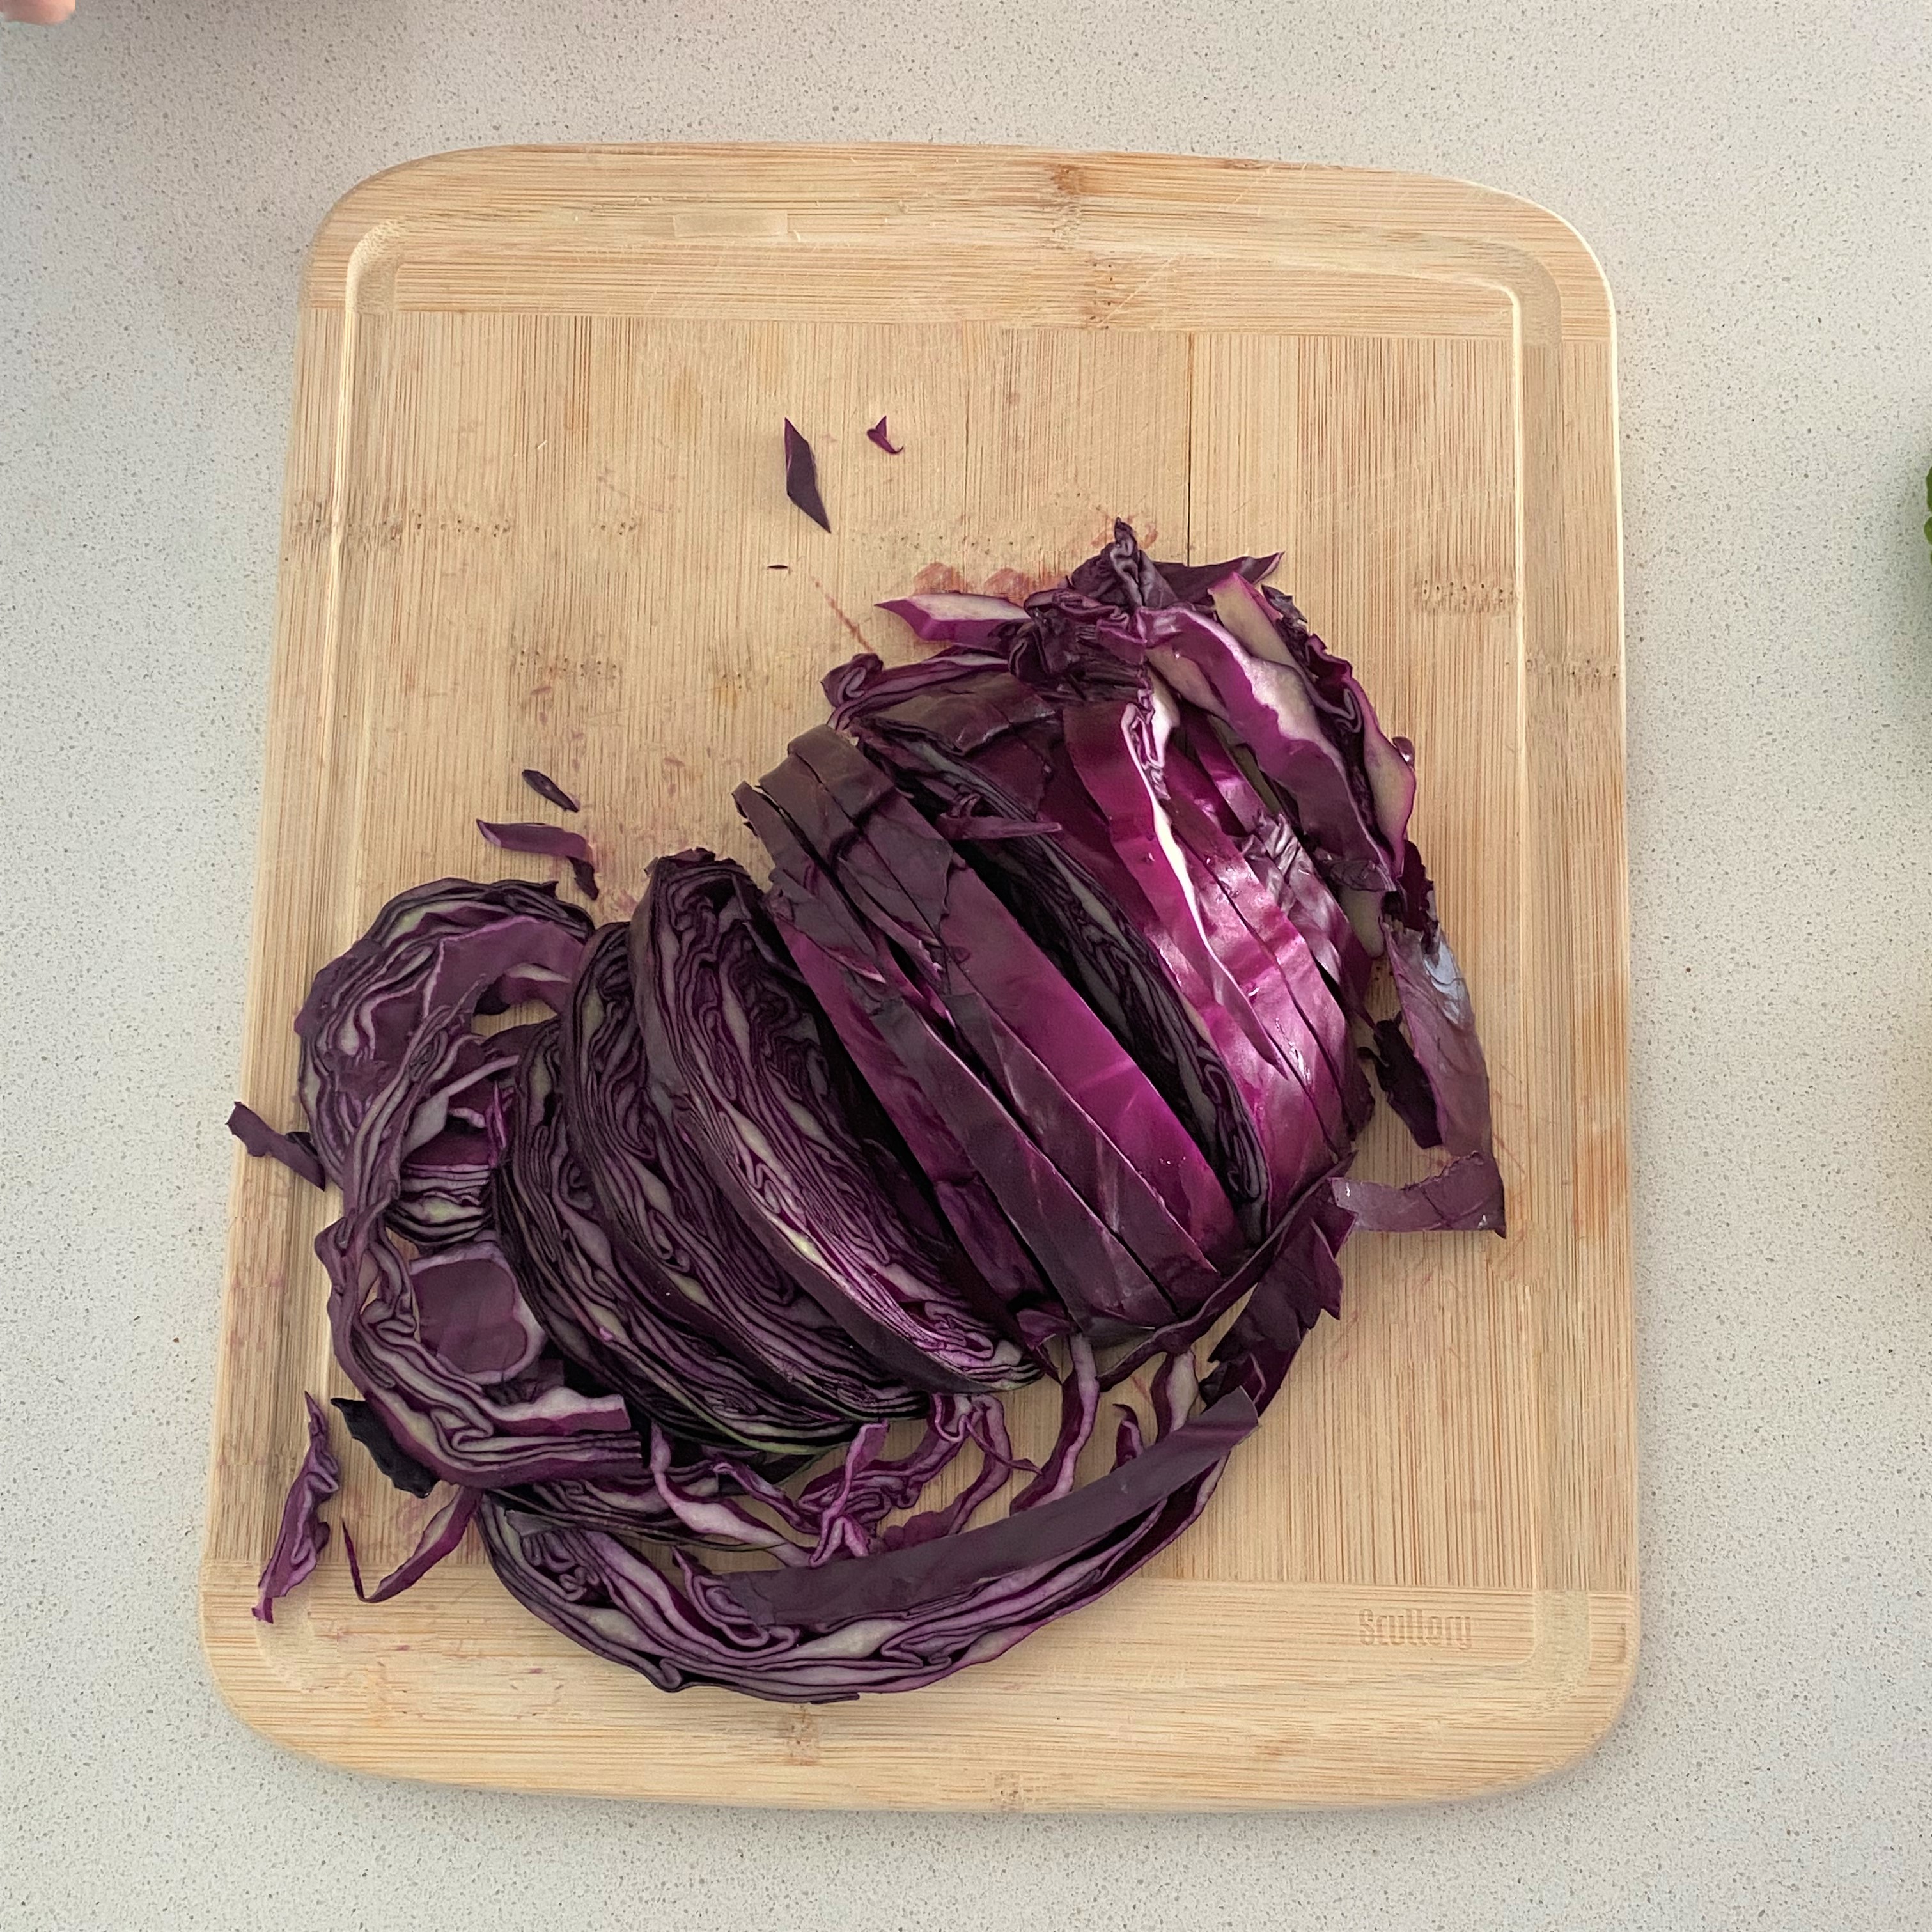 Cut up cabbage